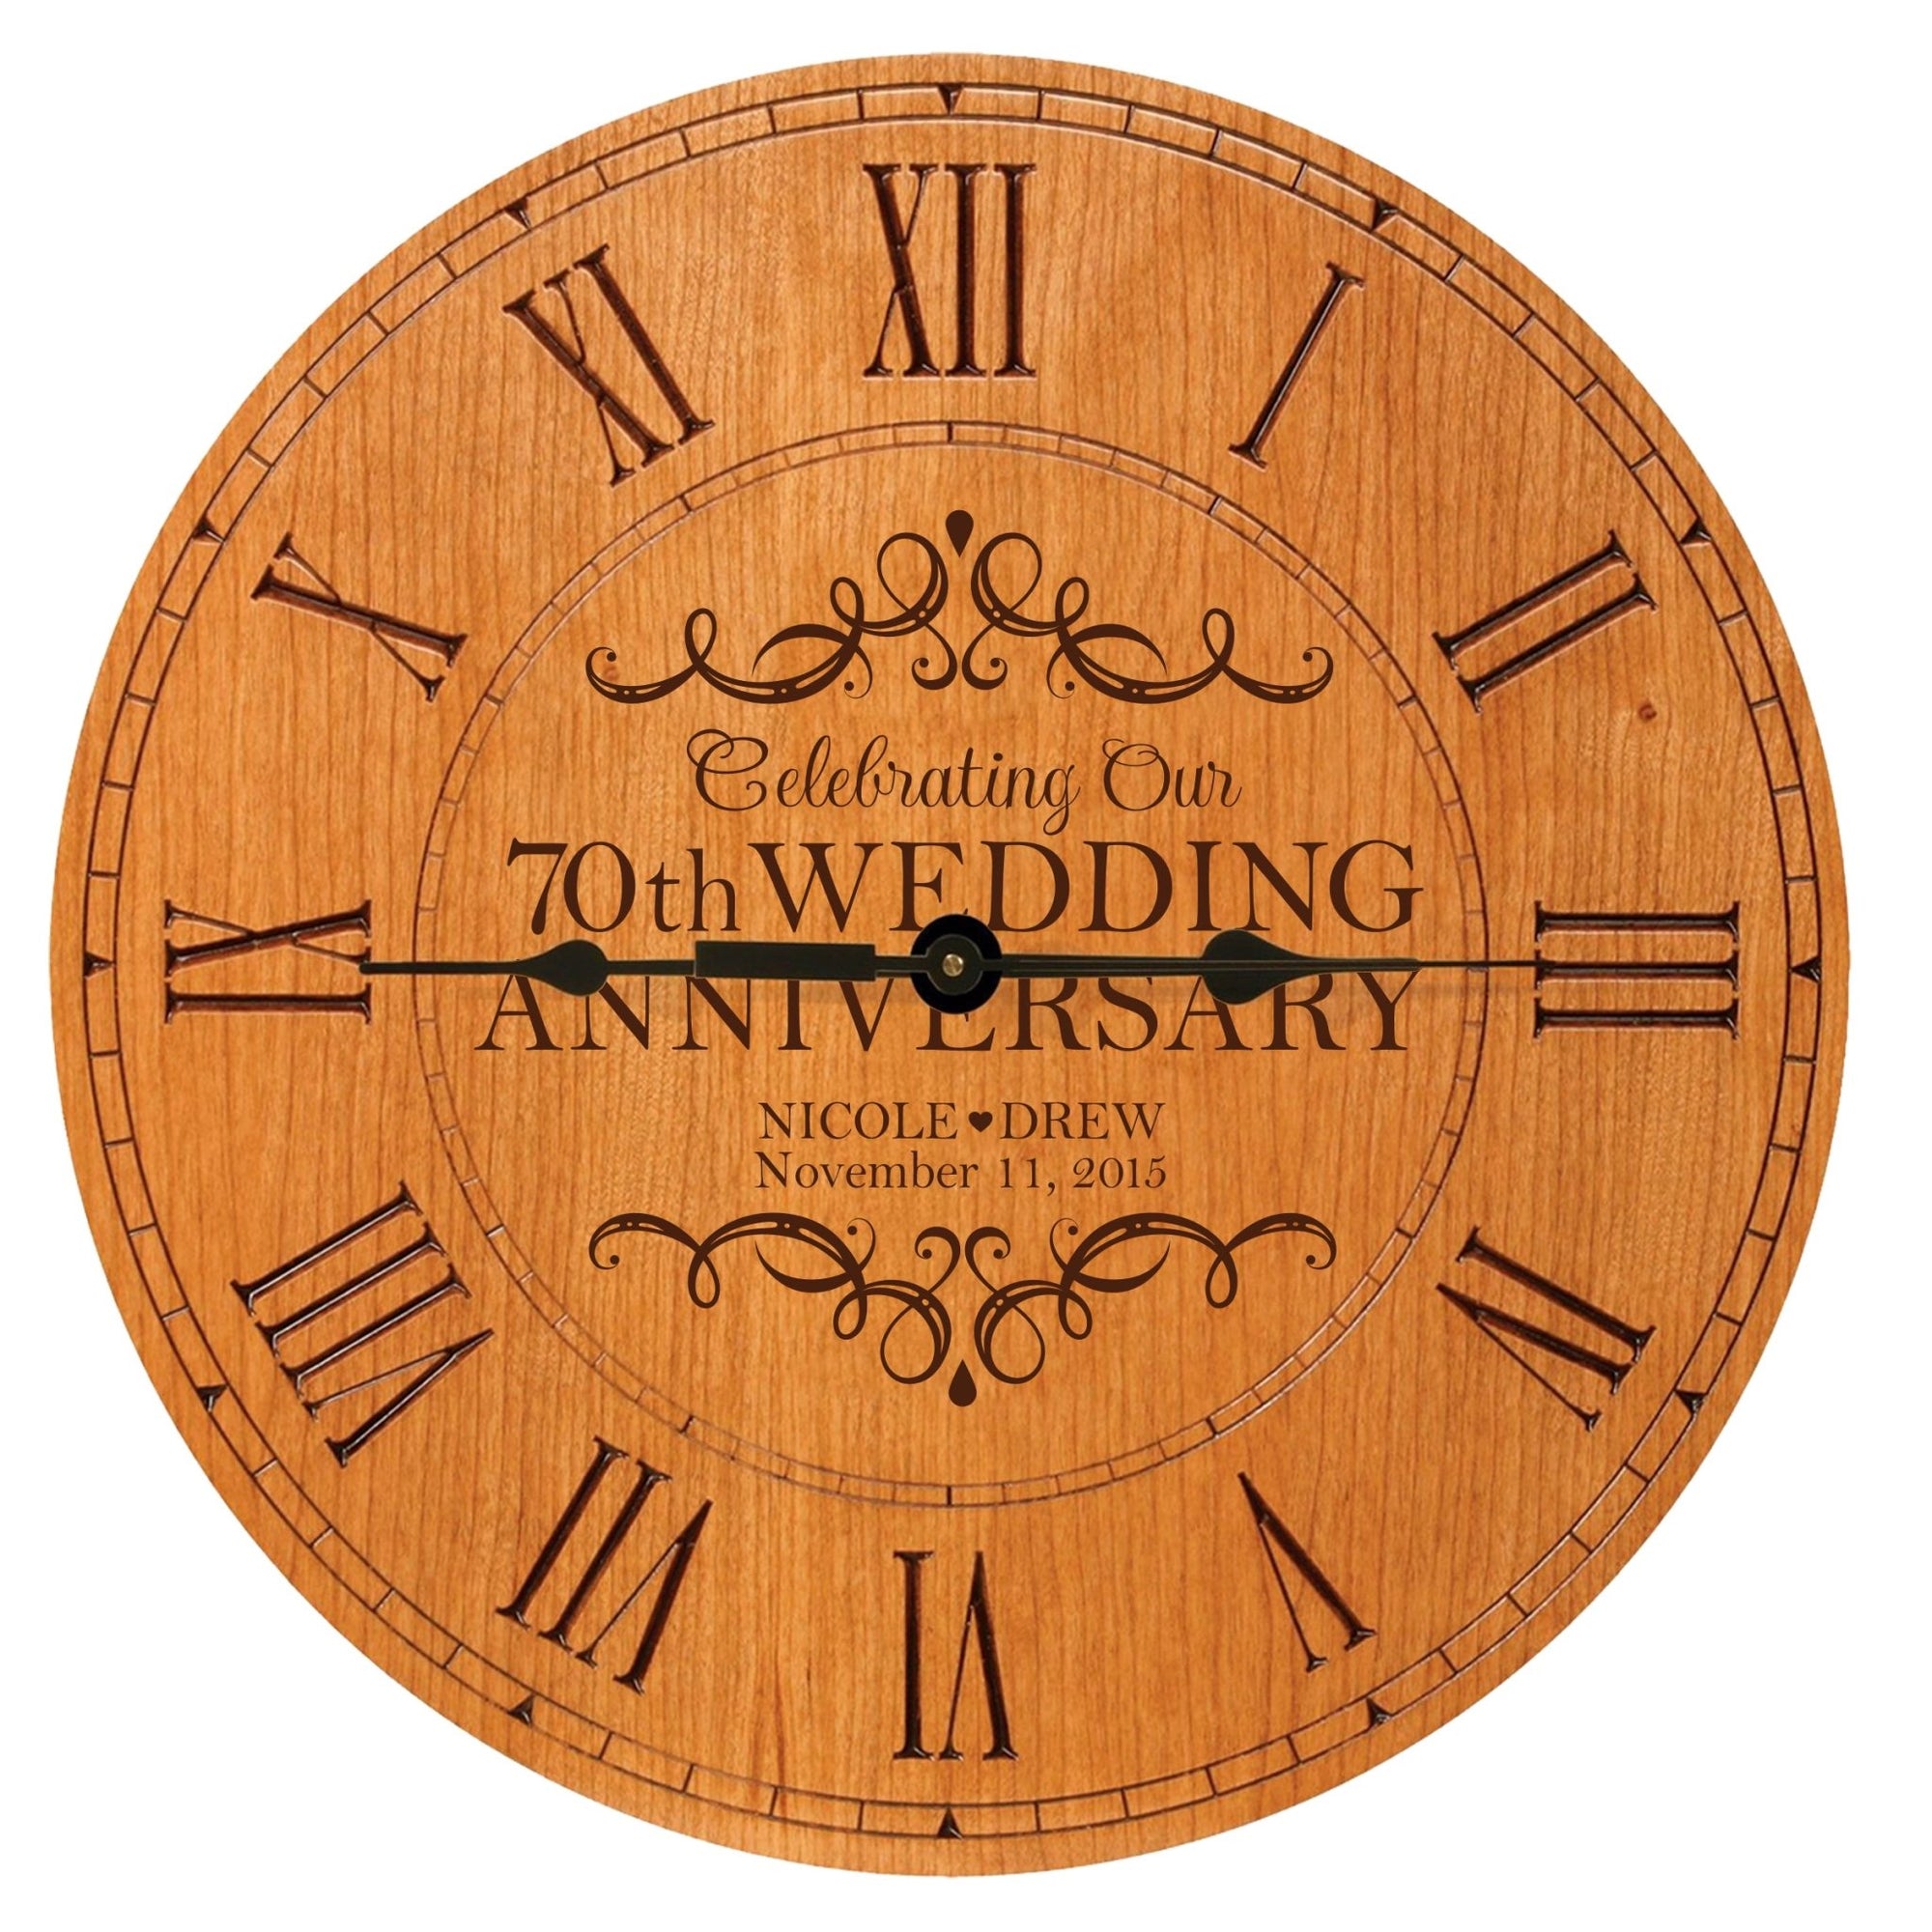 Lifesong Milestones Personalized Engraved Wooden Wall Clock for 70th Wedding Anniversary Gift Ideas